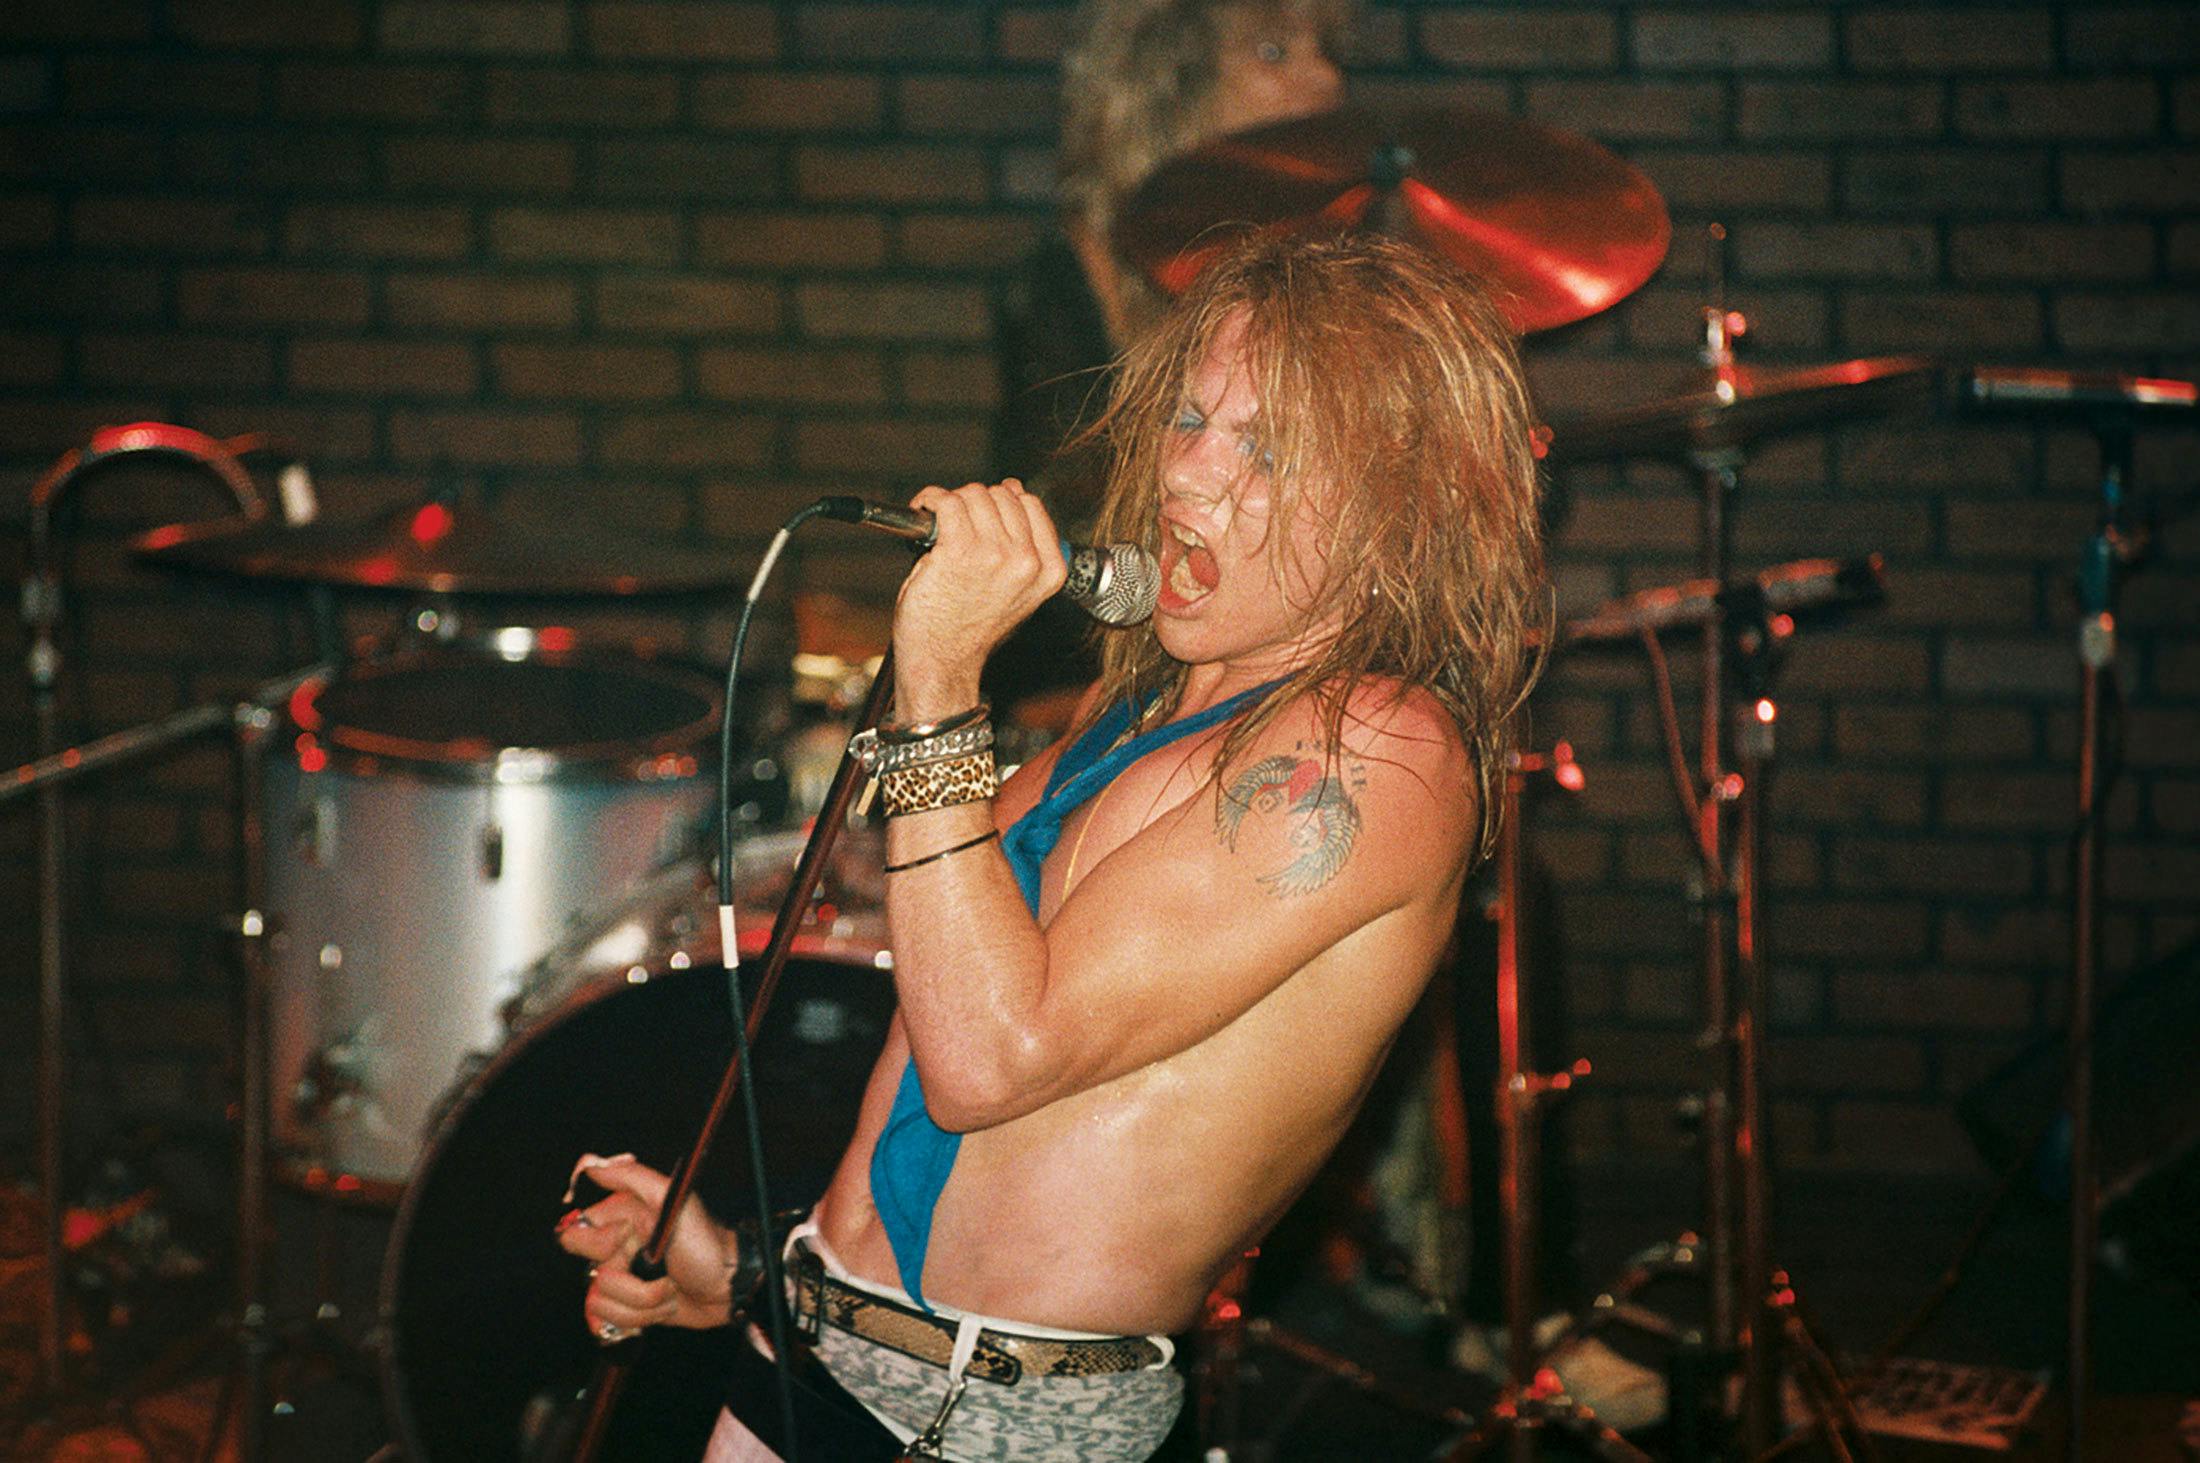 Exclusive preview: Early Guns N' Roses photographs from upcoming LA exhibit